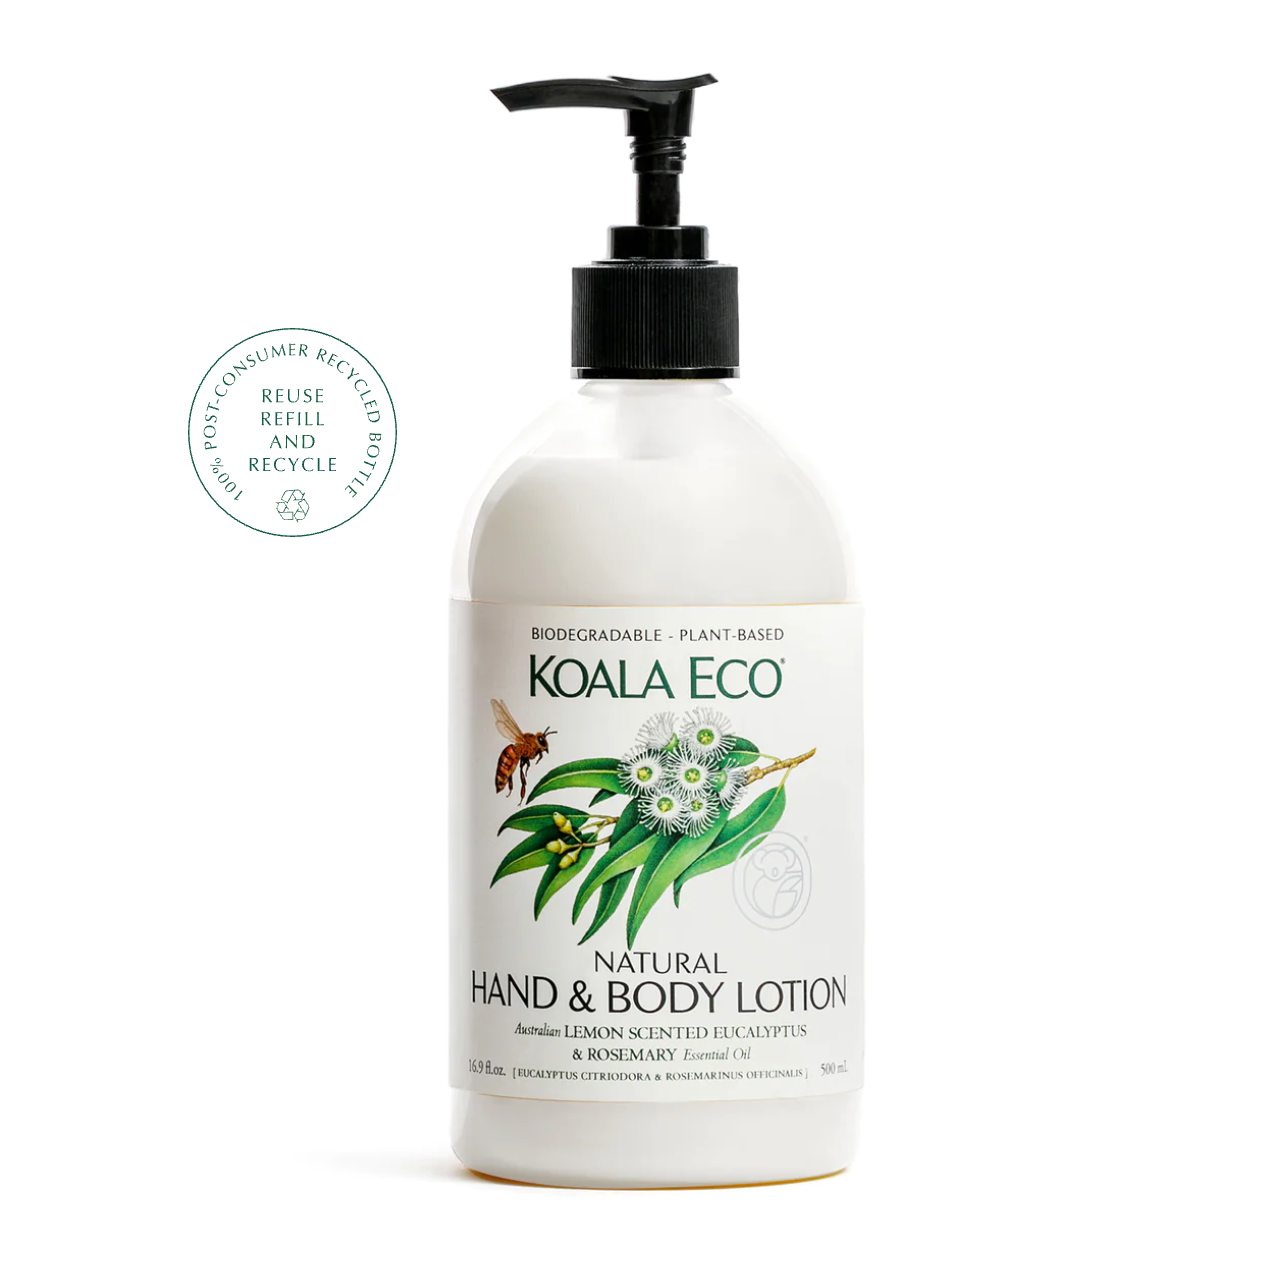 Hand & Body Lotion | Lemon Scented Eucalyptus & Rosemary Our Lemon Scented Eucalyptus & Rosemary Hand & Body Lotion combines two of nature’s super-healers and stress relievers in one powerful, aromatic formula. This biodegradable and eco-friendly plant-based formula is safe for sensitive skin.